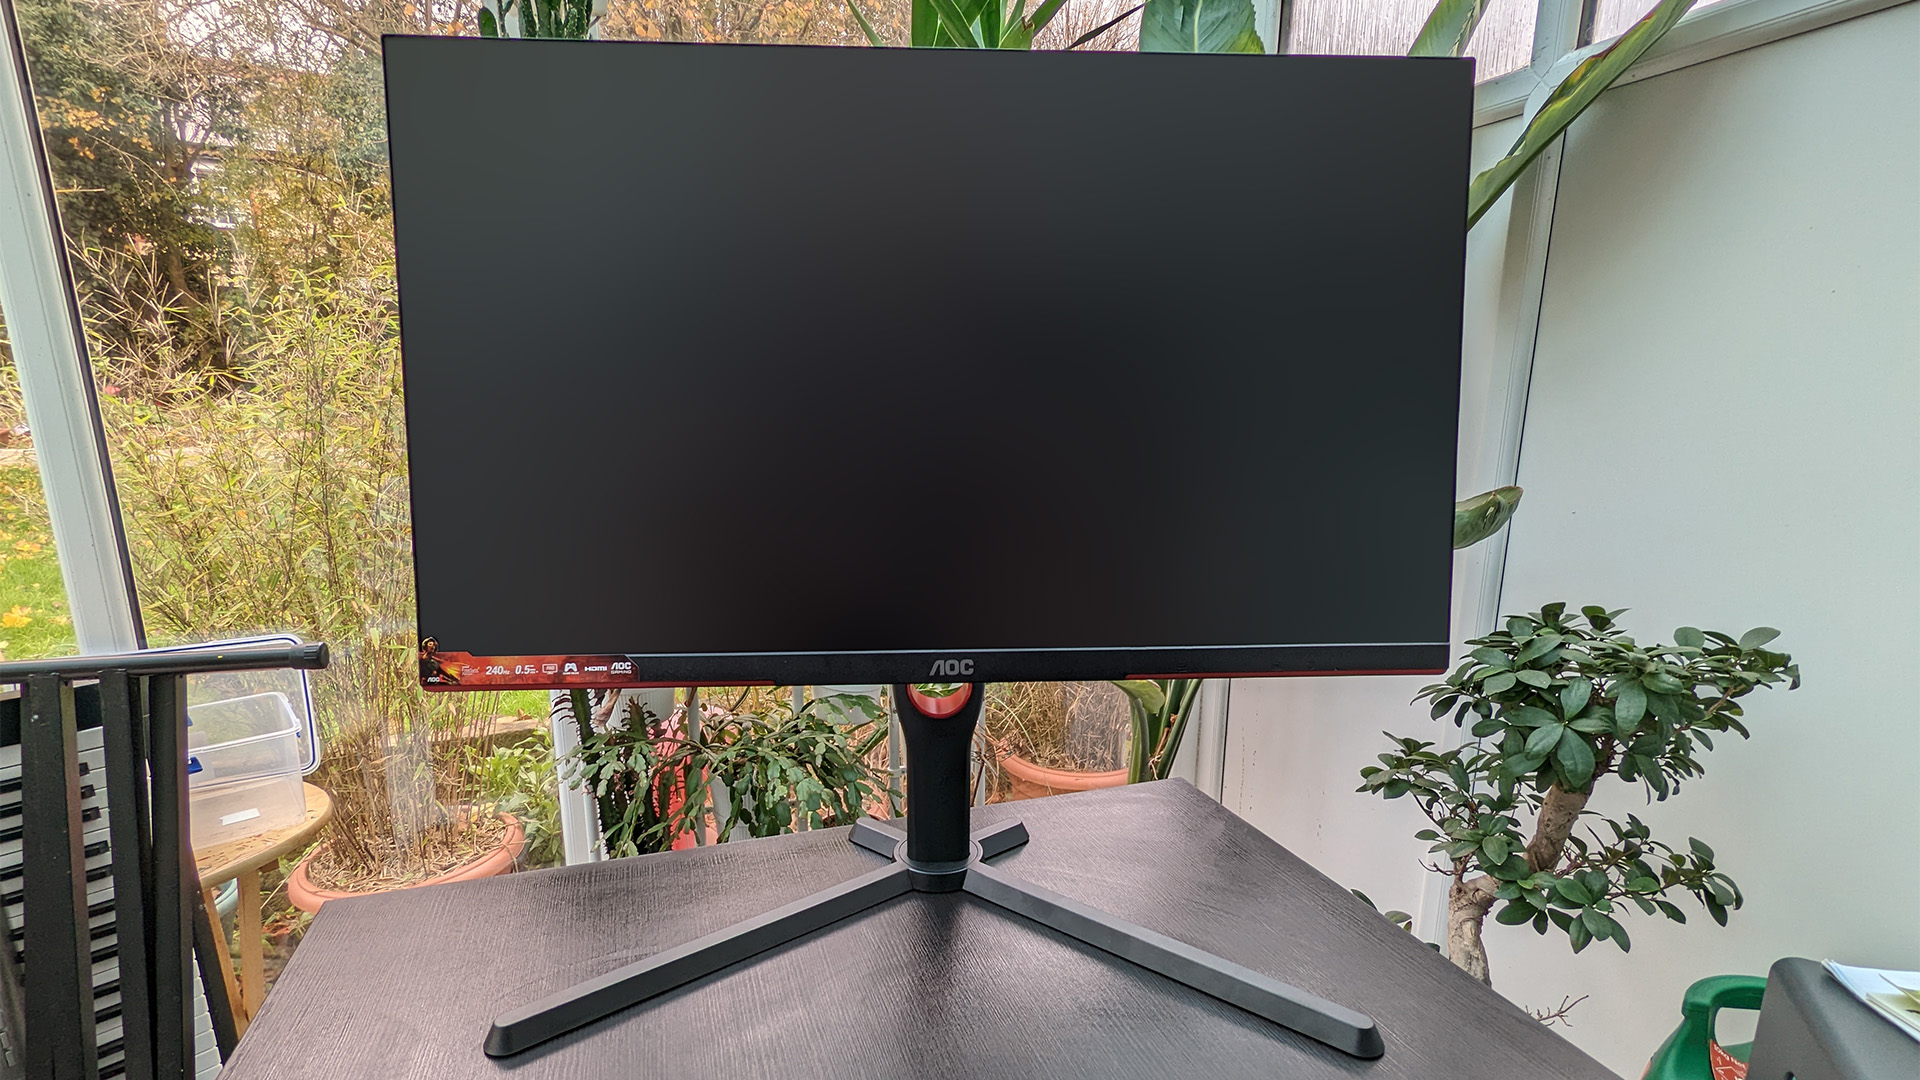 BenQ's Mobiuz EX240 is a solid 1080p option that's easy on the